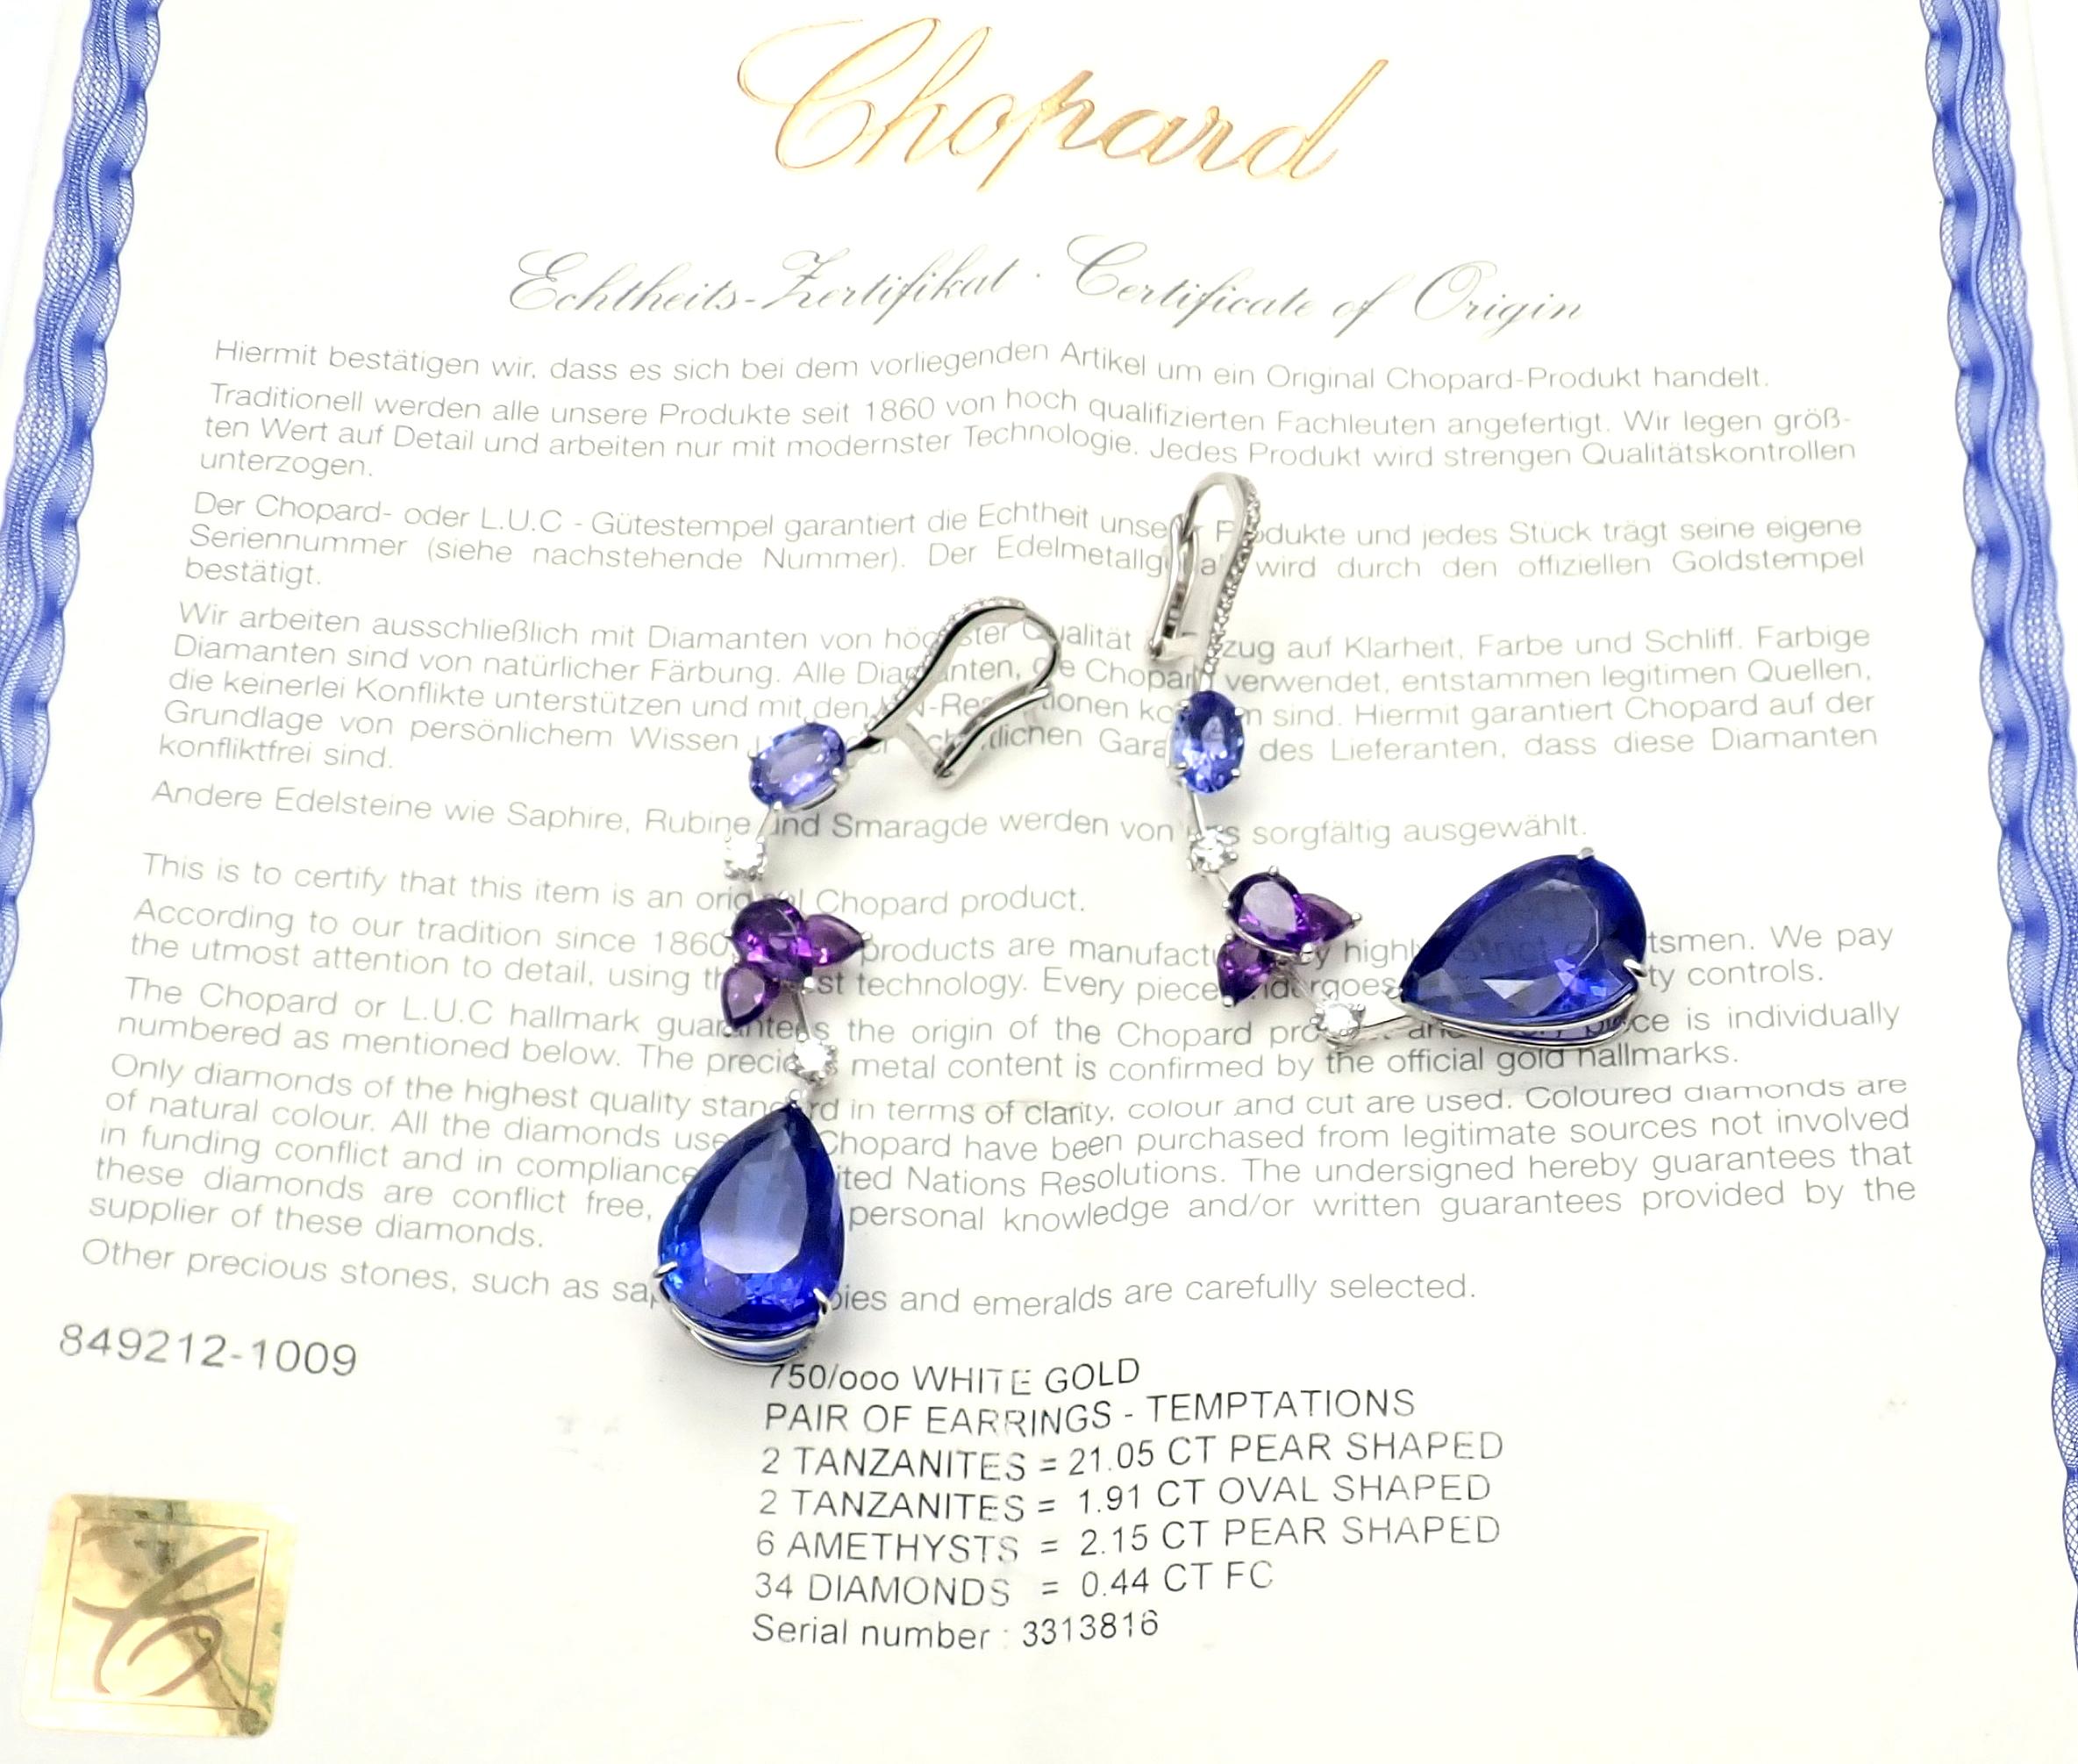 18k White Gold Diamond Tanzanite Amethyst Temptations Earrings from High Jewelry Collection 
by Chopard. 
These earrings come with Chopard certificate and a Chopard box.
These earrings are from High Jewelry collection and they are called